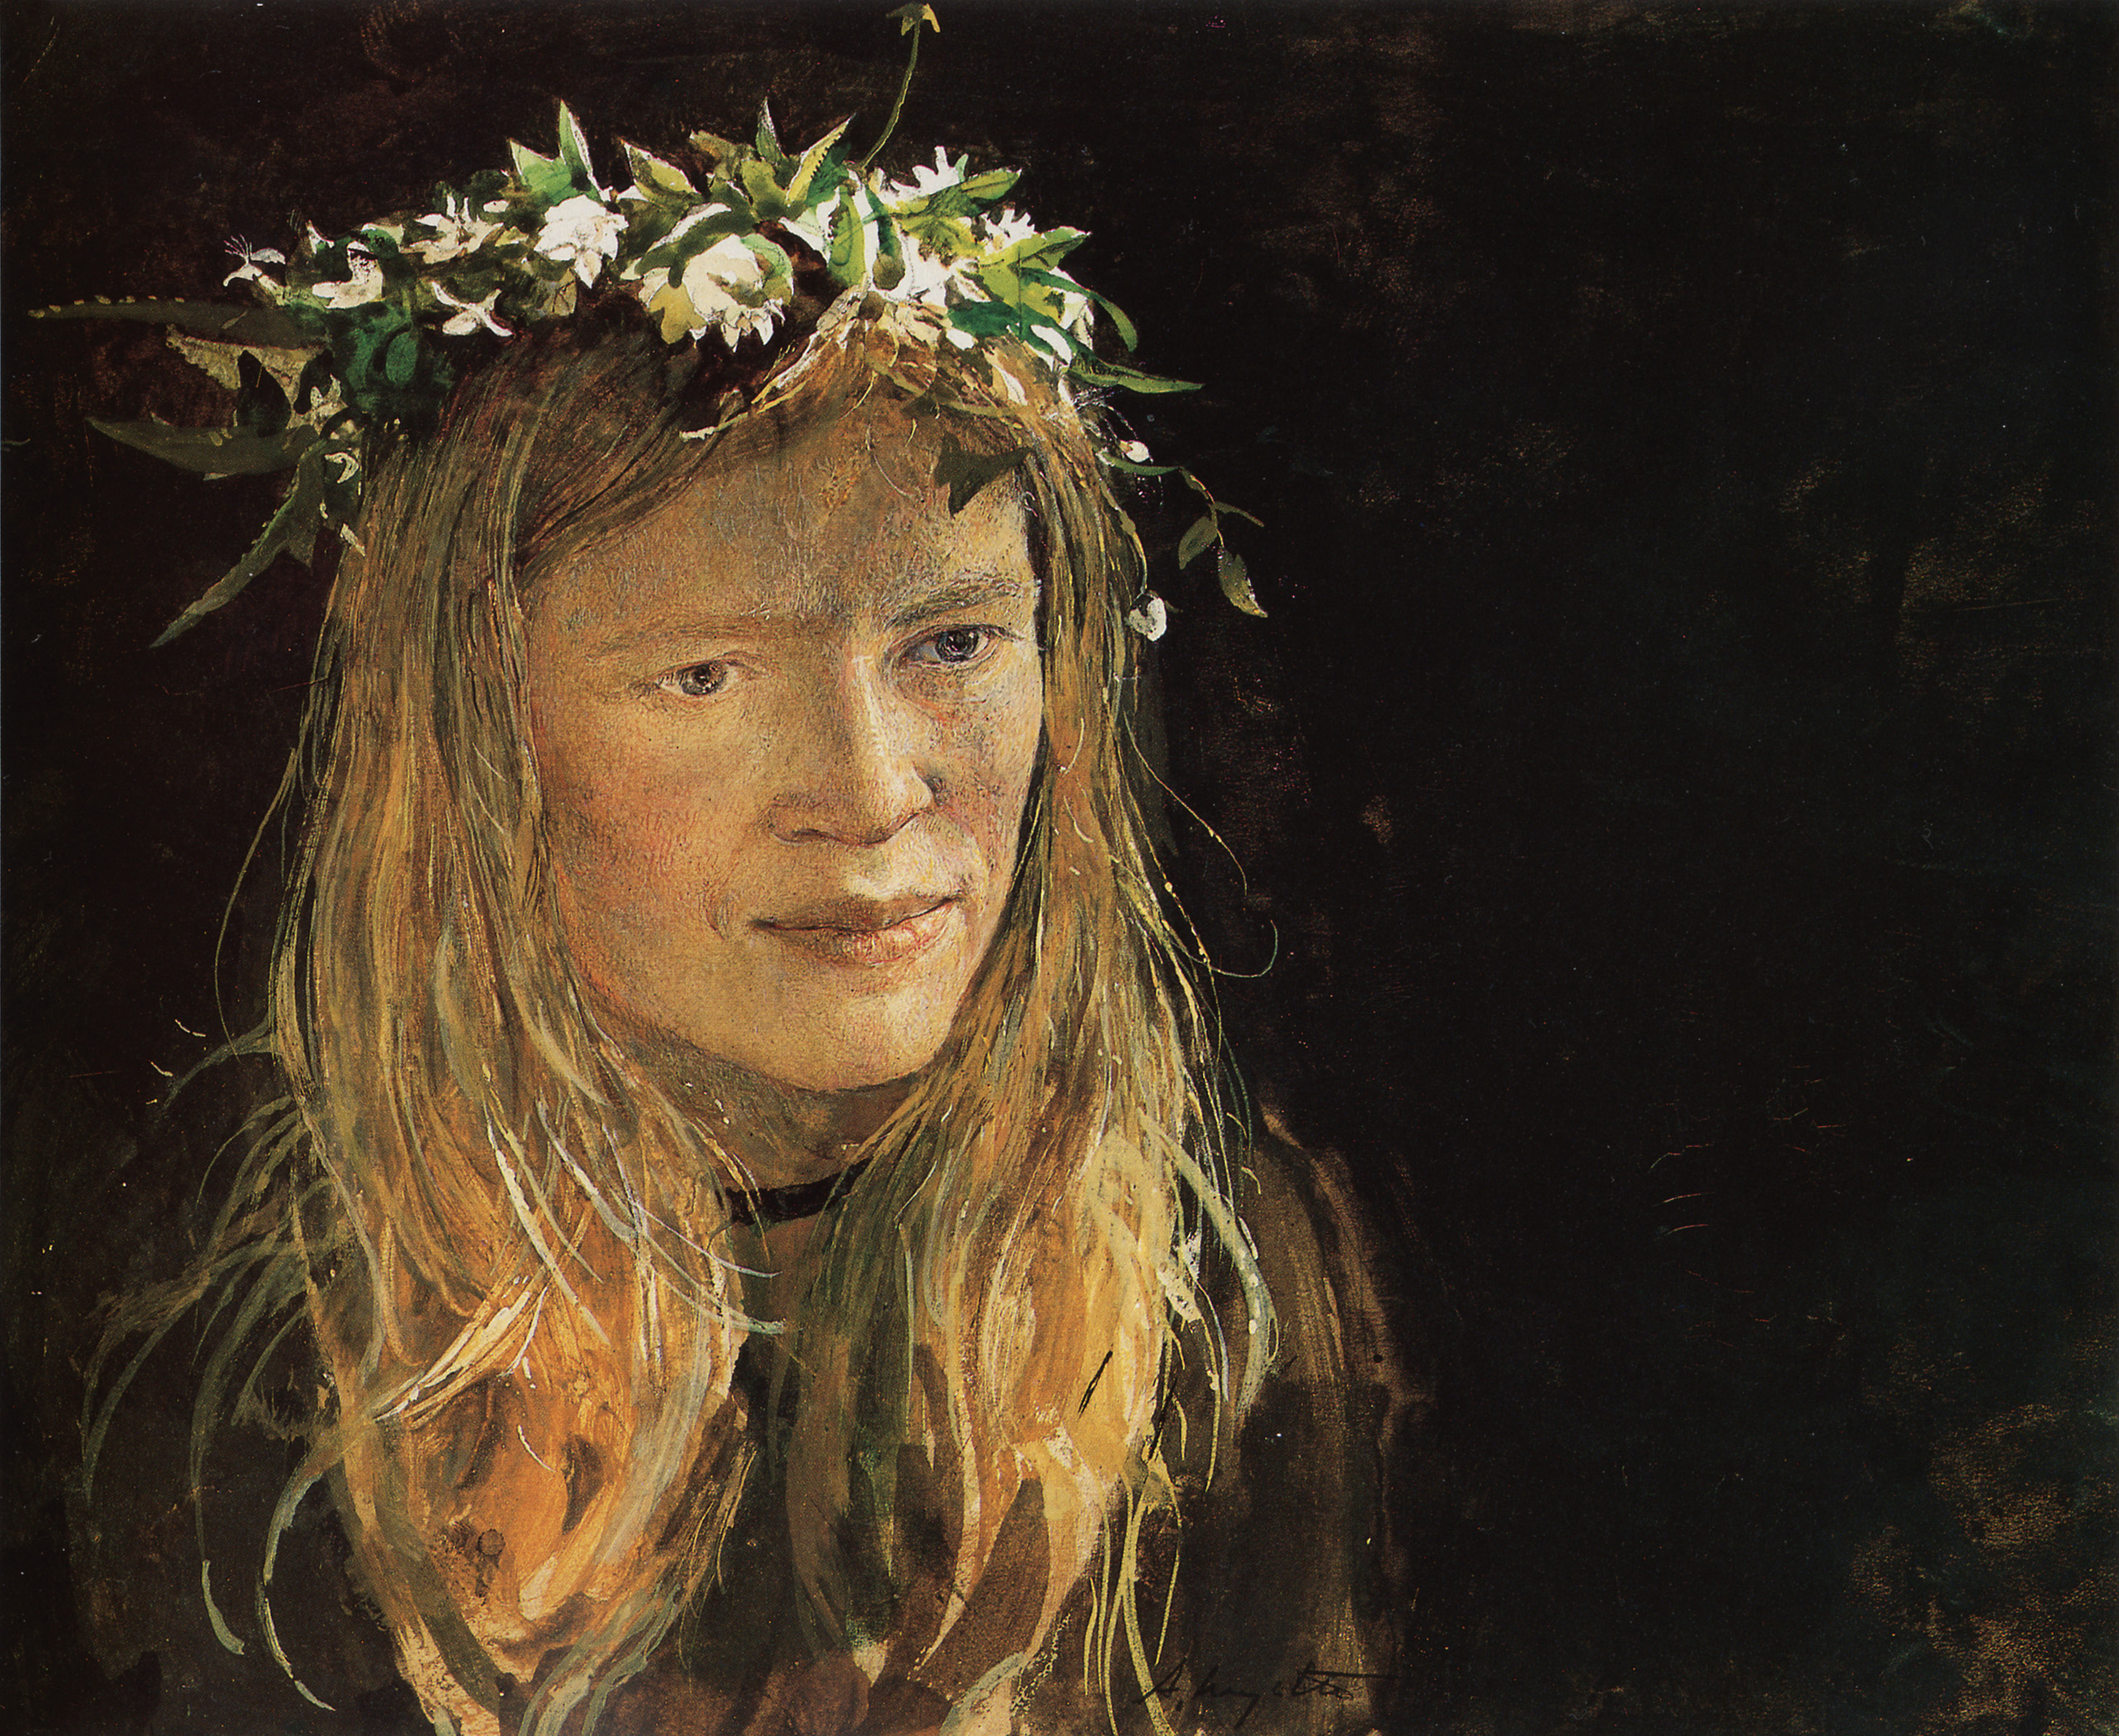 A portrait of a young girl with long blonde hair wearing a beautifully decorated flower crown.